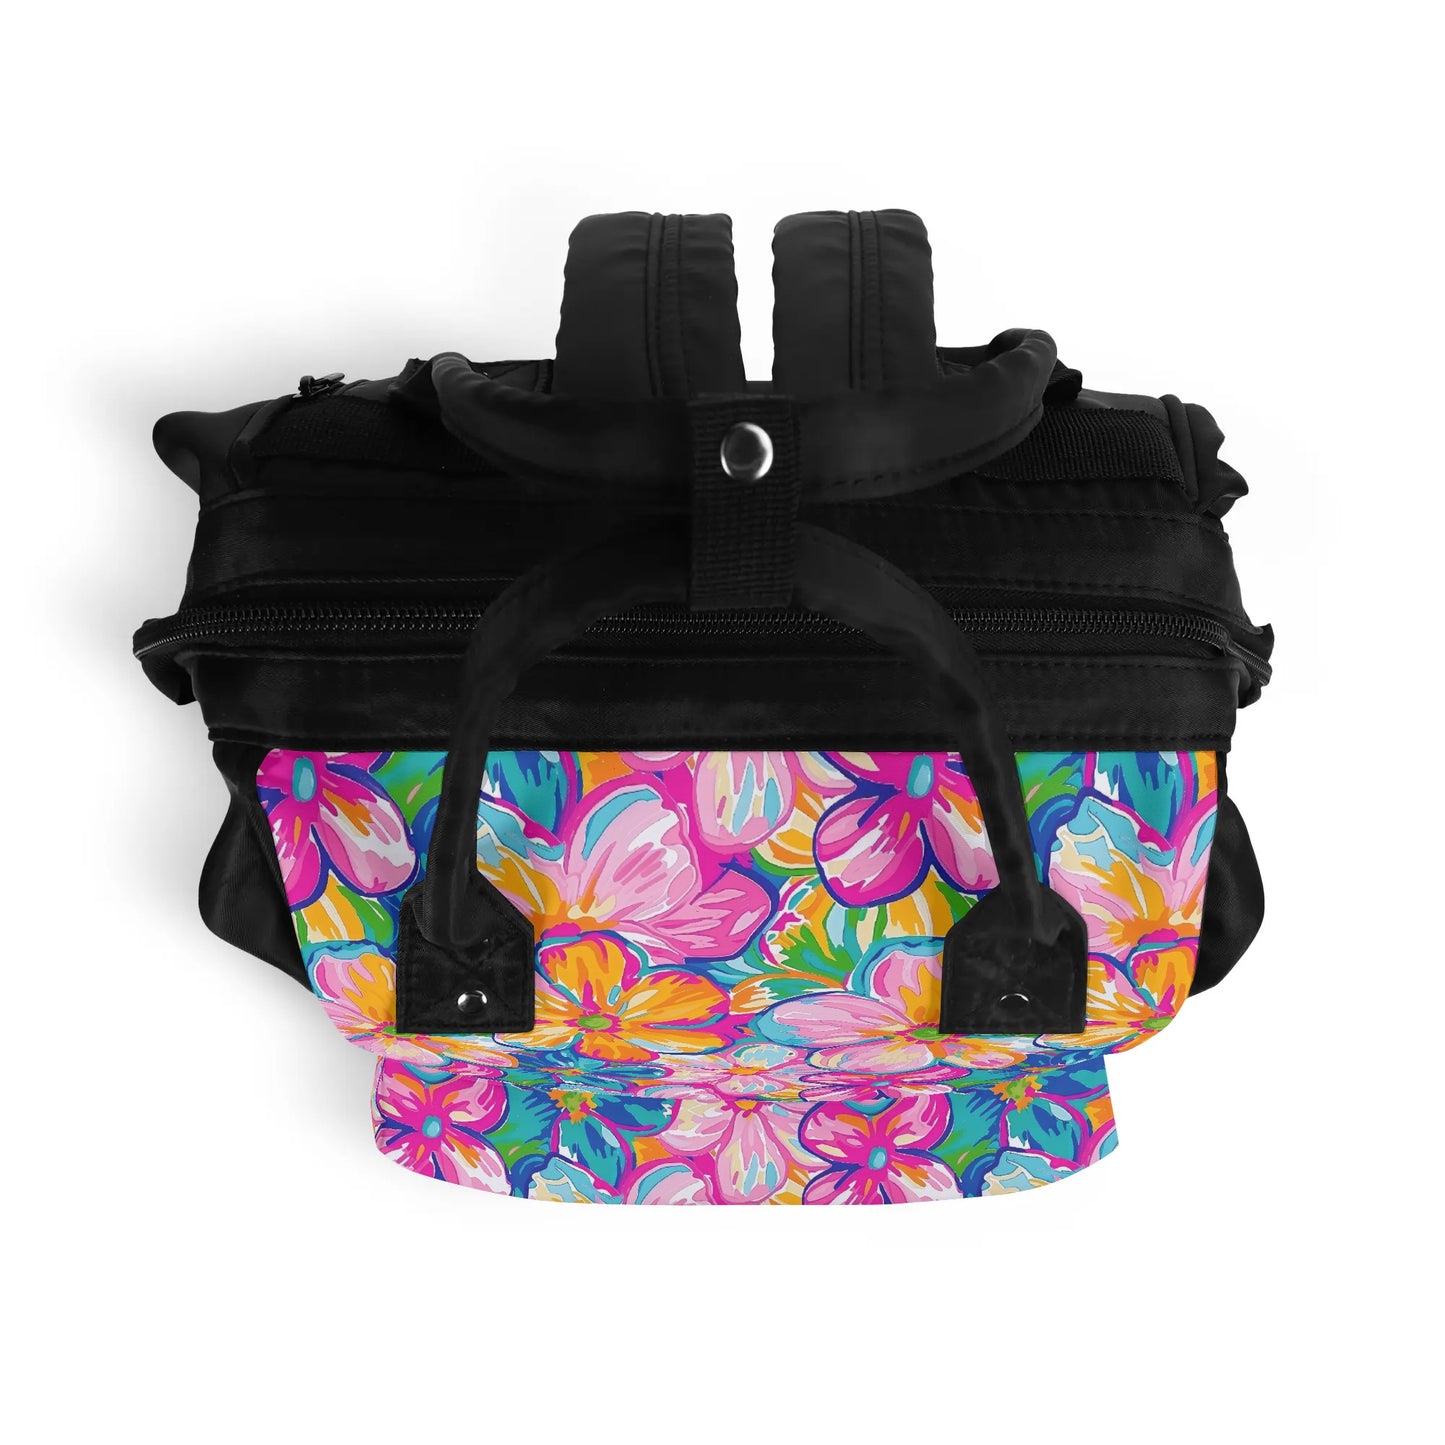 Chromatic Blossoms: Large Watercolor Flowers in Mixed Pinks, Blues, and Oranges Large Capacity Backpack Diaper Nursing Bag